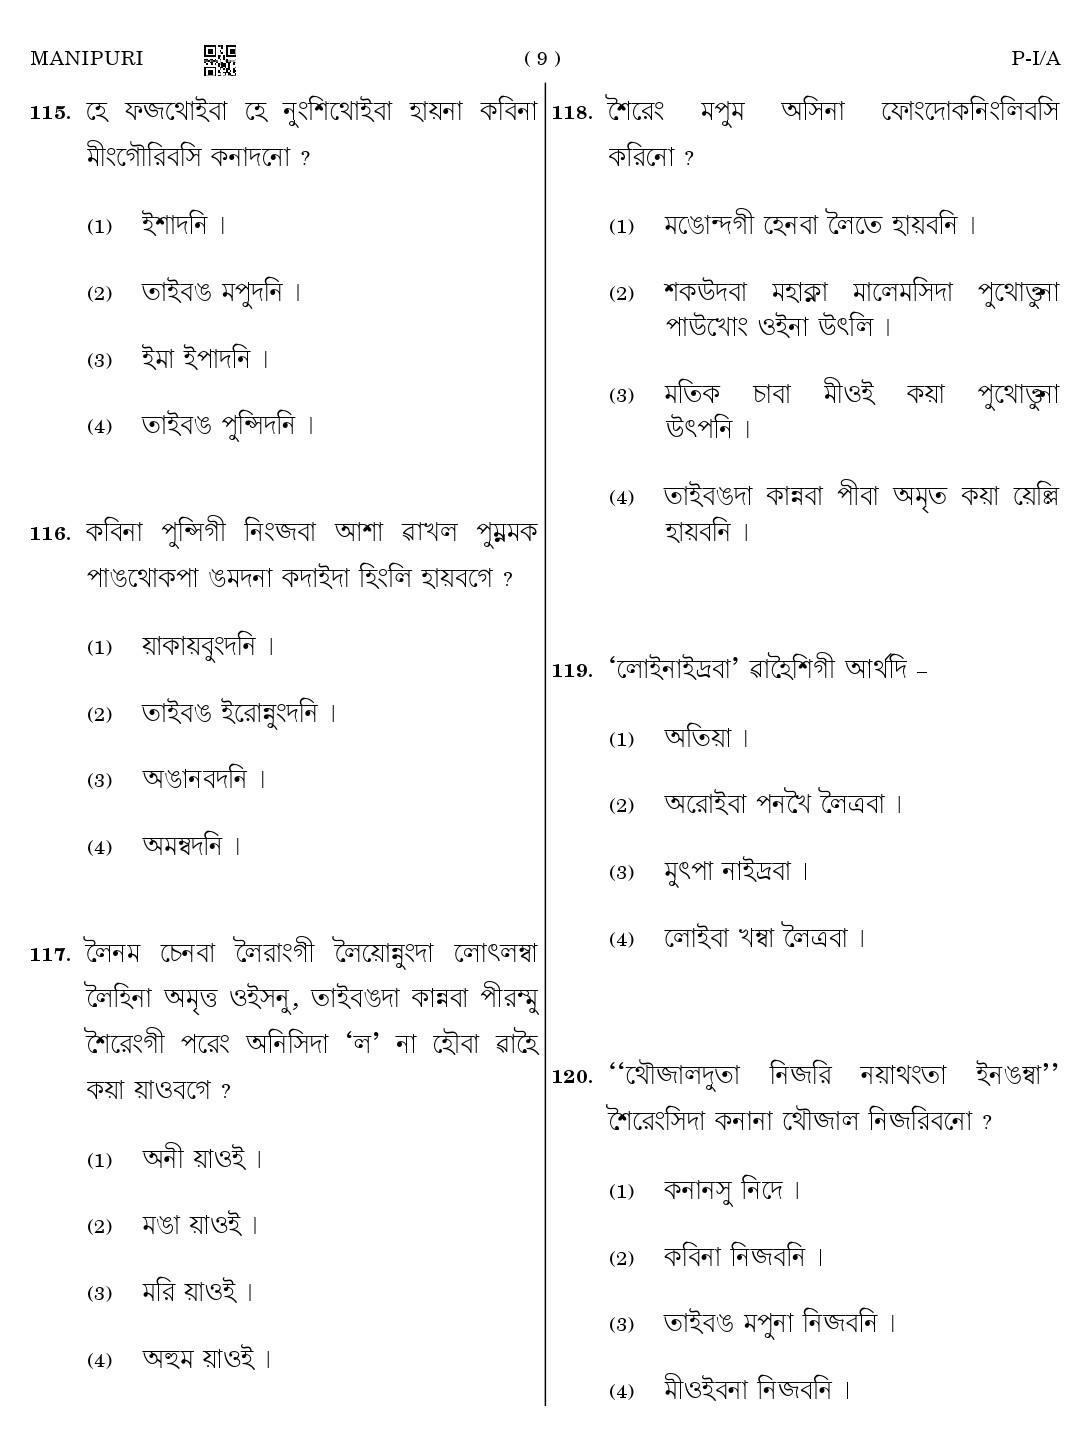 CTET August 2023 Manipuri Paper 1 Part IV and V 9